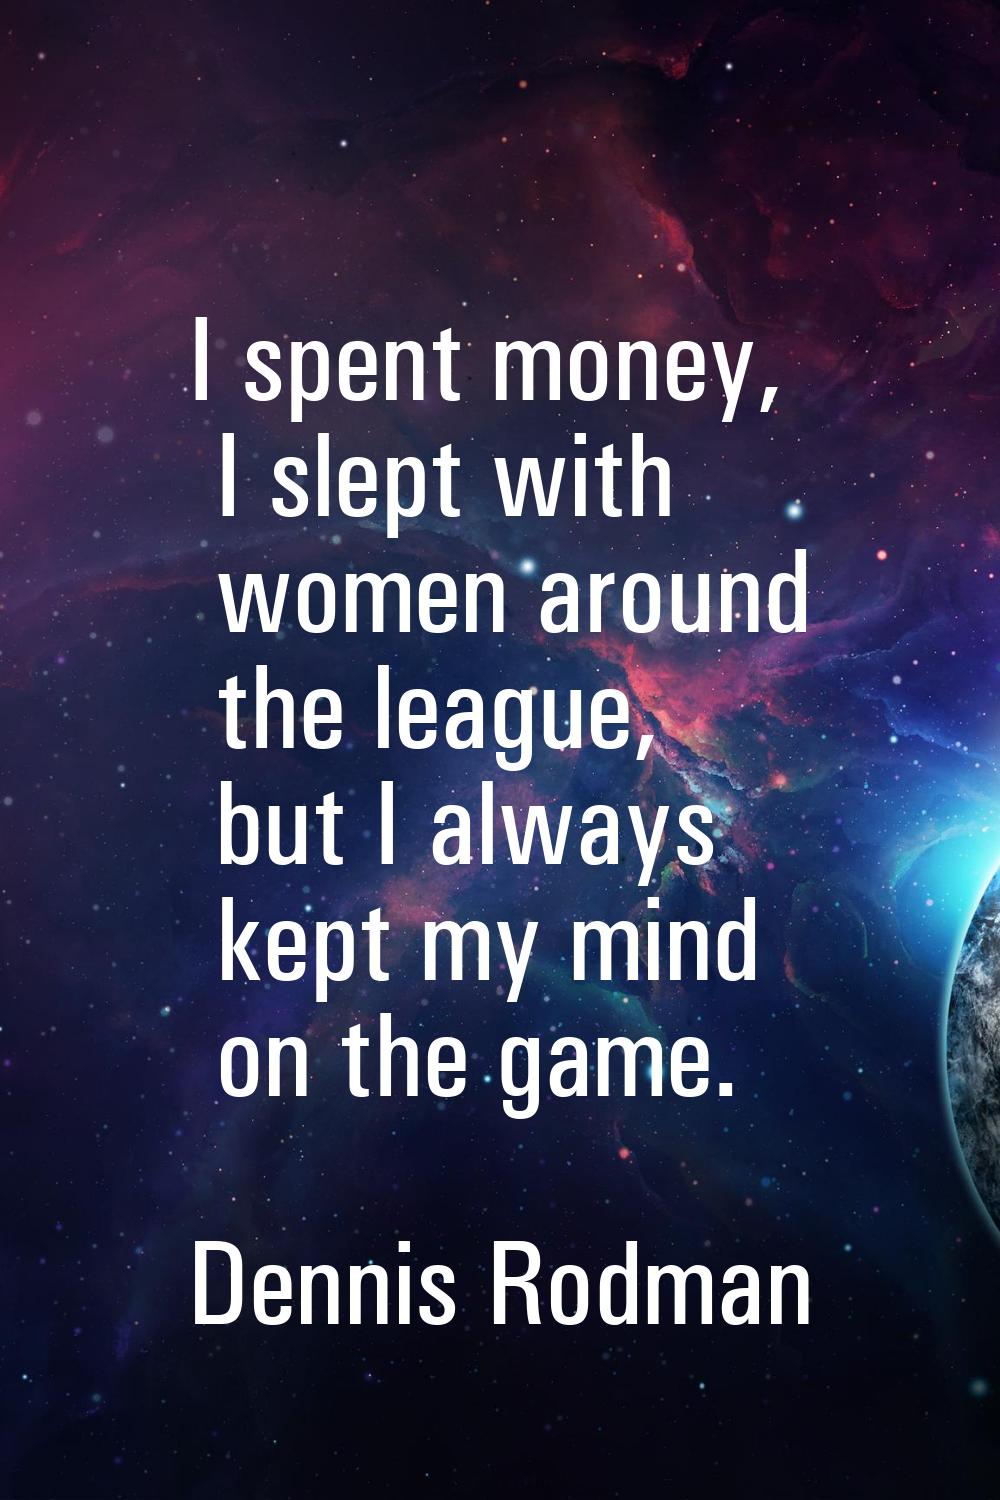 I spent money, I slept with women around the league, but I always kept my mind on the game.